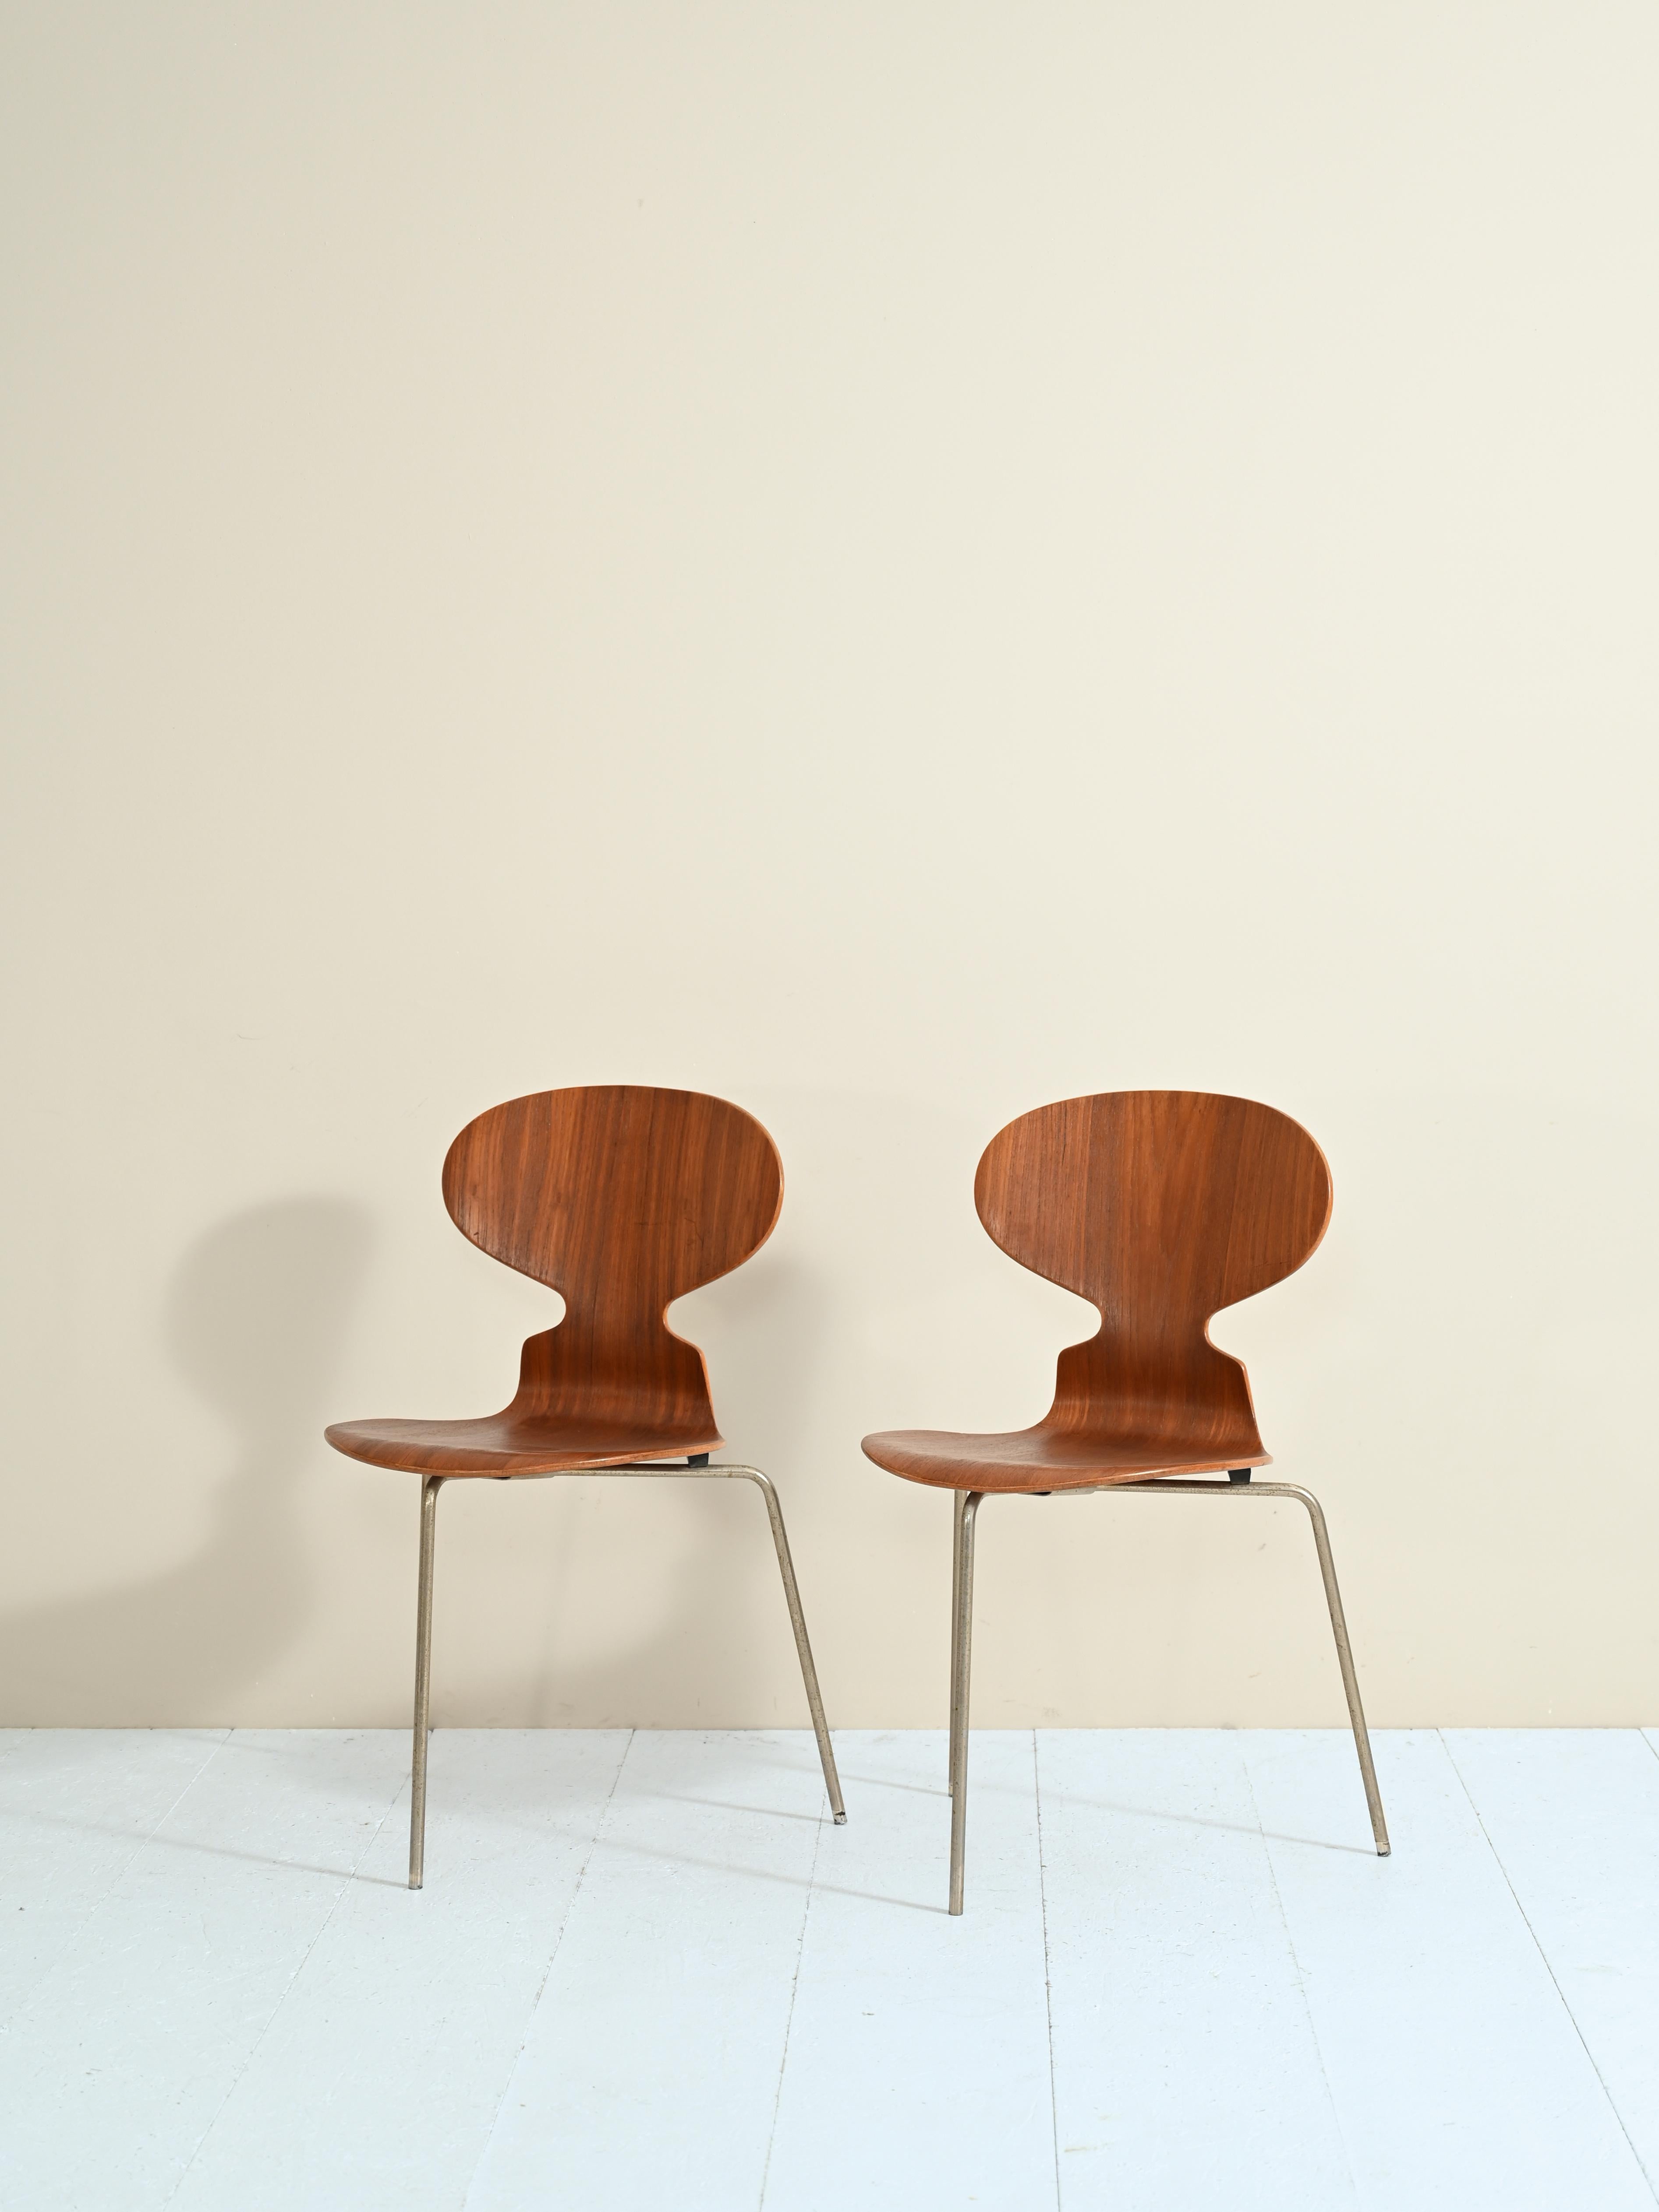 Pairs of 'Ant' chairs, model 3101, in teak wood, designed by Arne Jacobsen in 1952 and produced by Fritz Hansen of the 1950s.

The frame is teak wood and metal.

Very good vintage condition. 

AC171